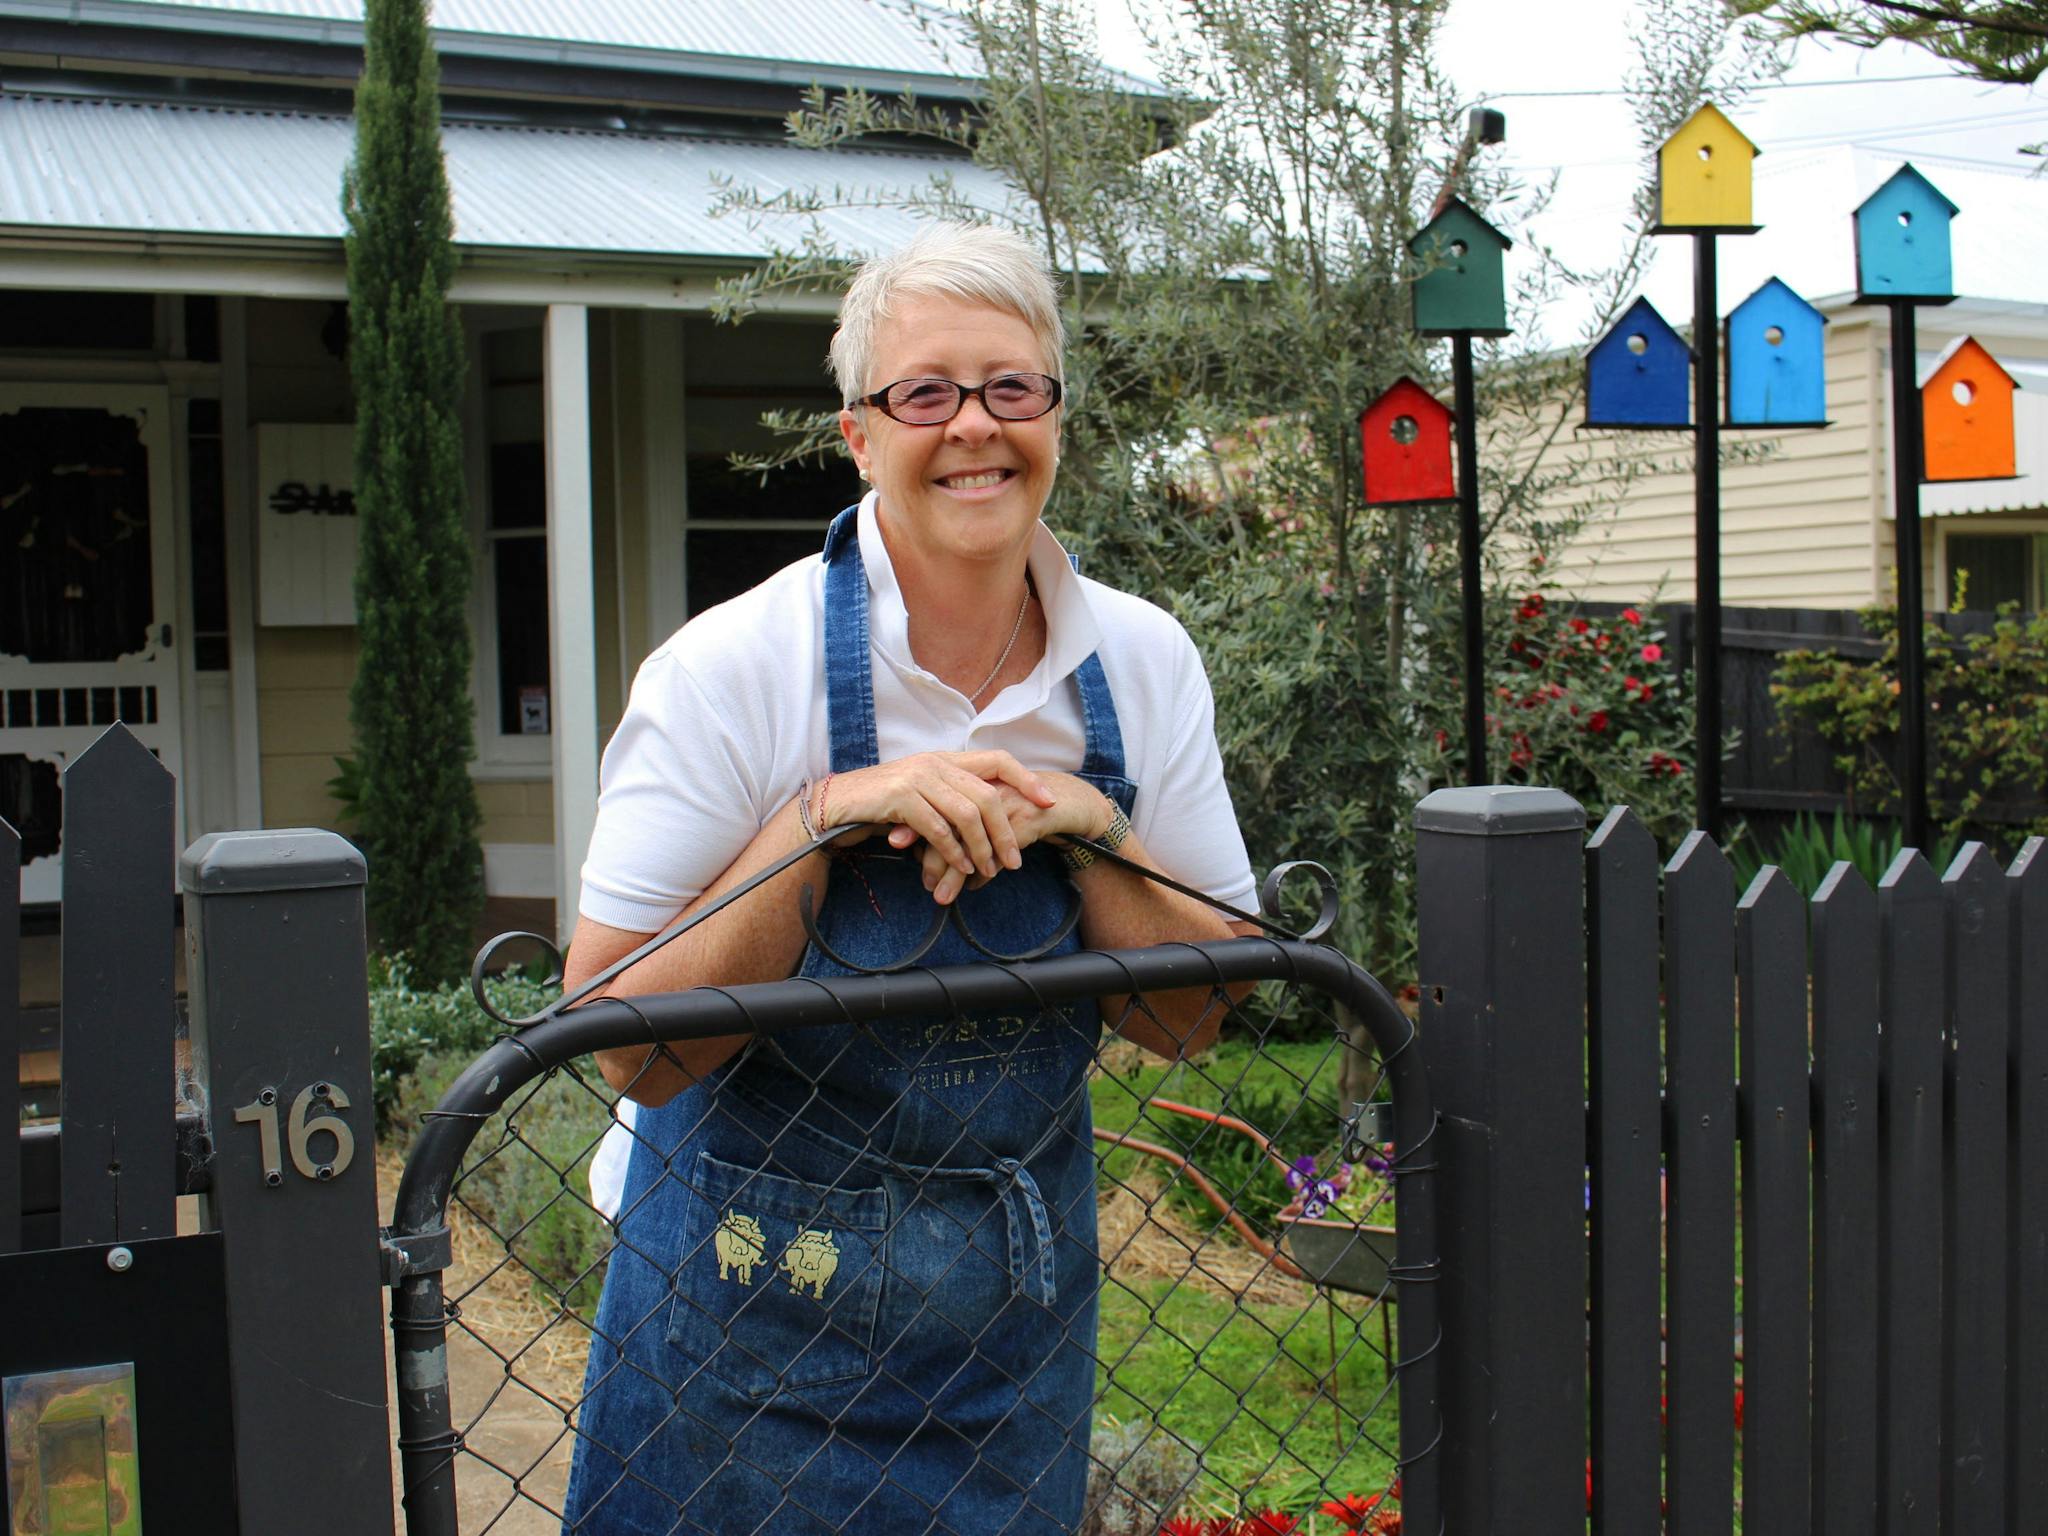 Owner-operator Kellie-Anne looks forward to hosting your Rutherglen stay